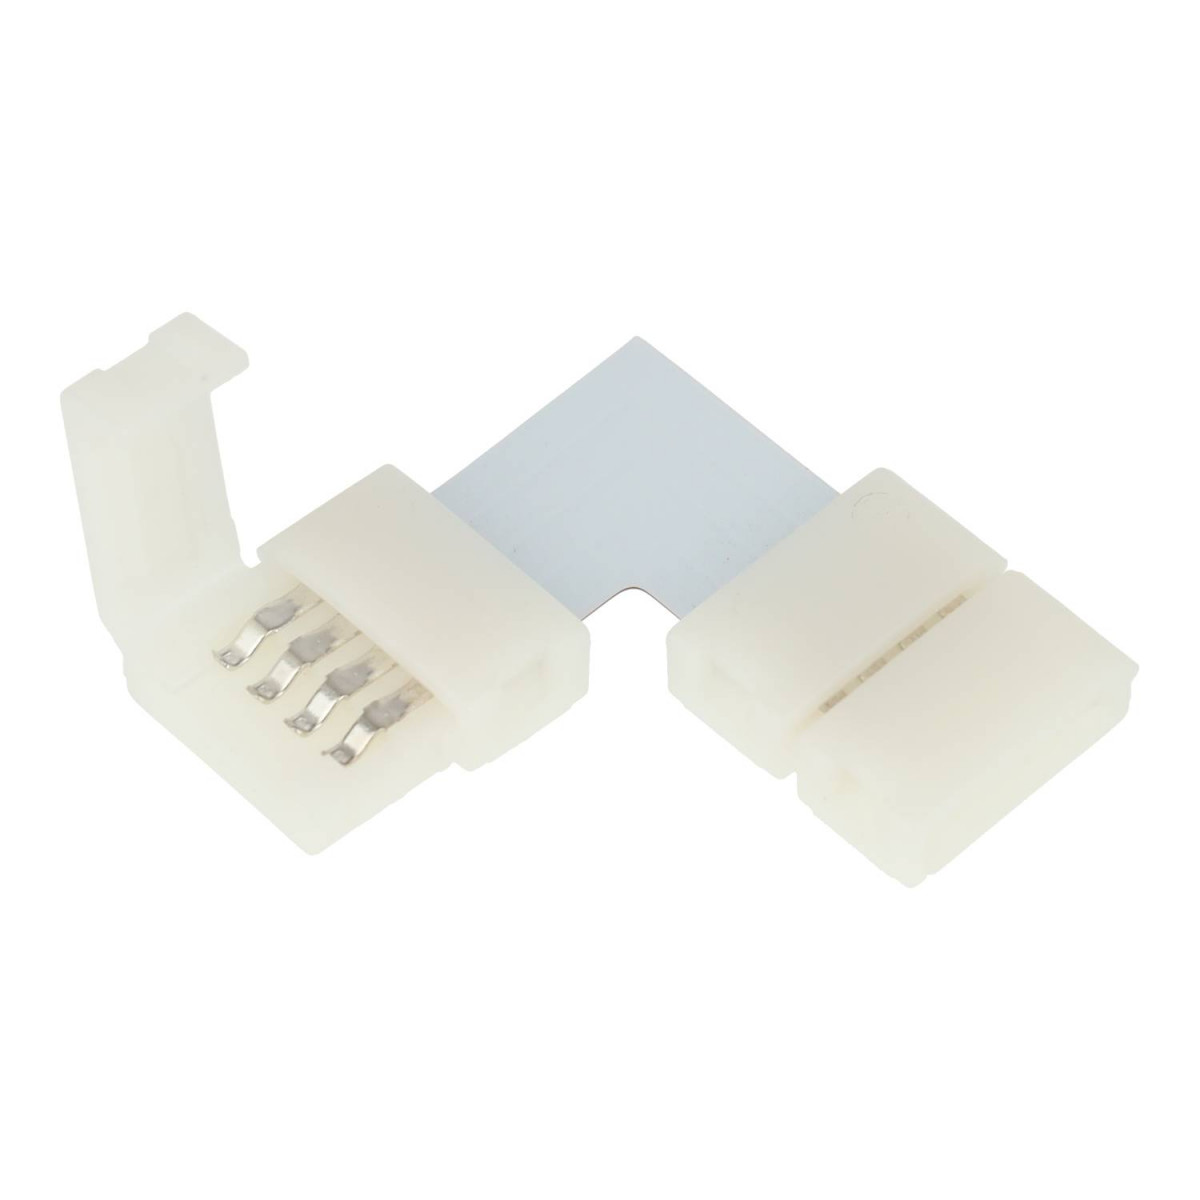 L-shaped Connector for RGB 5050 12/24V Strips